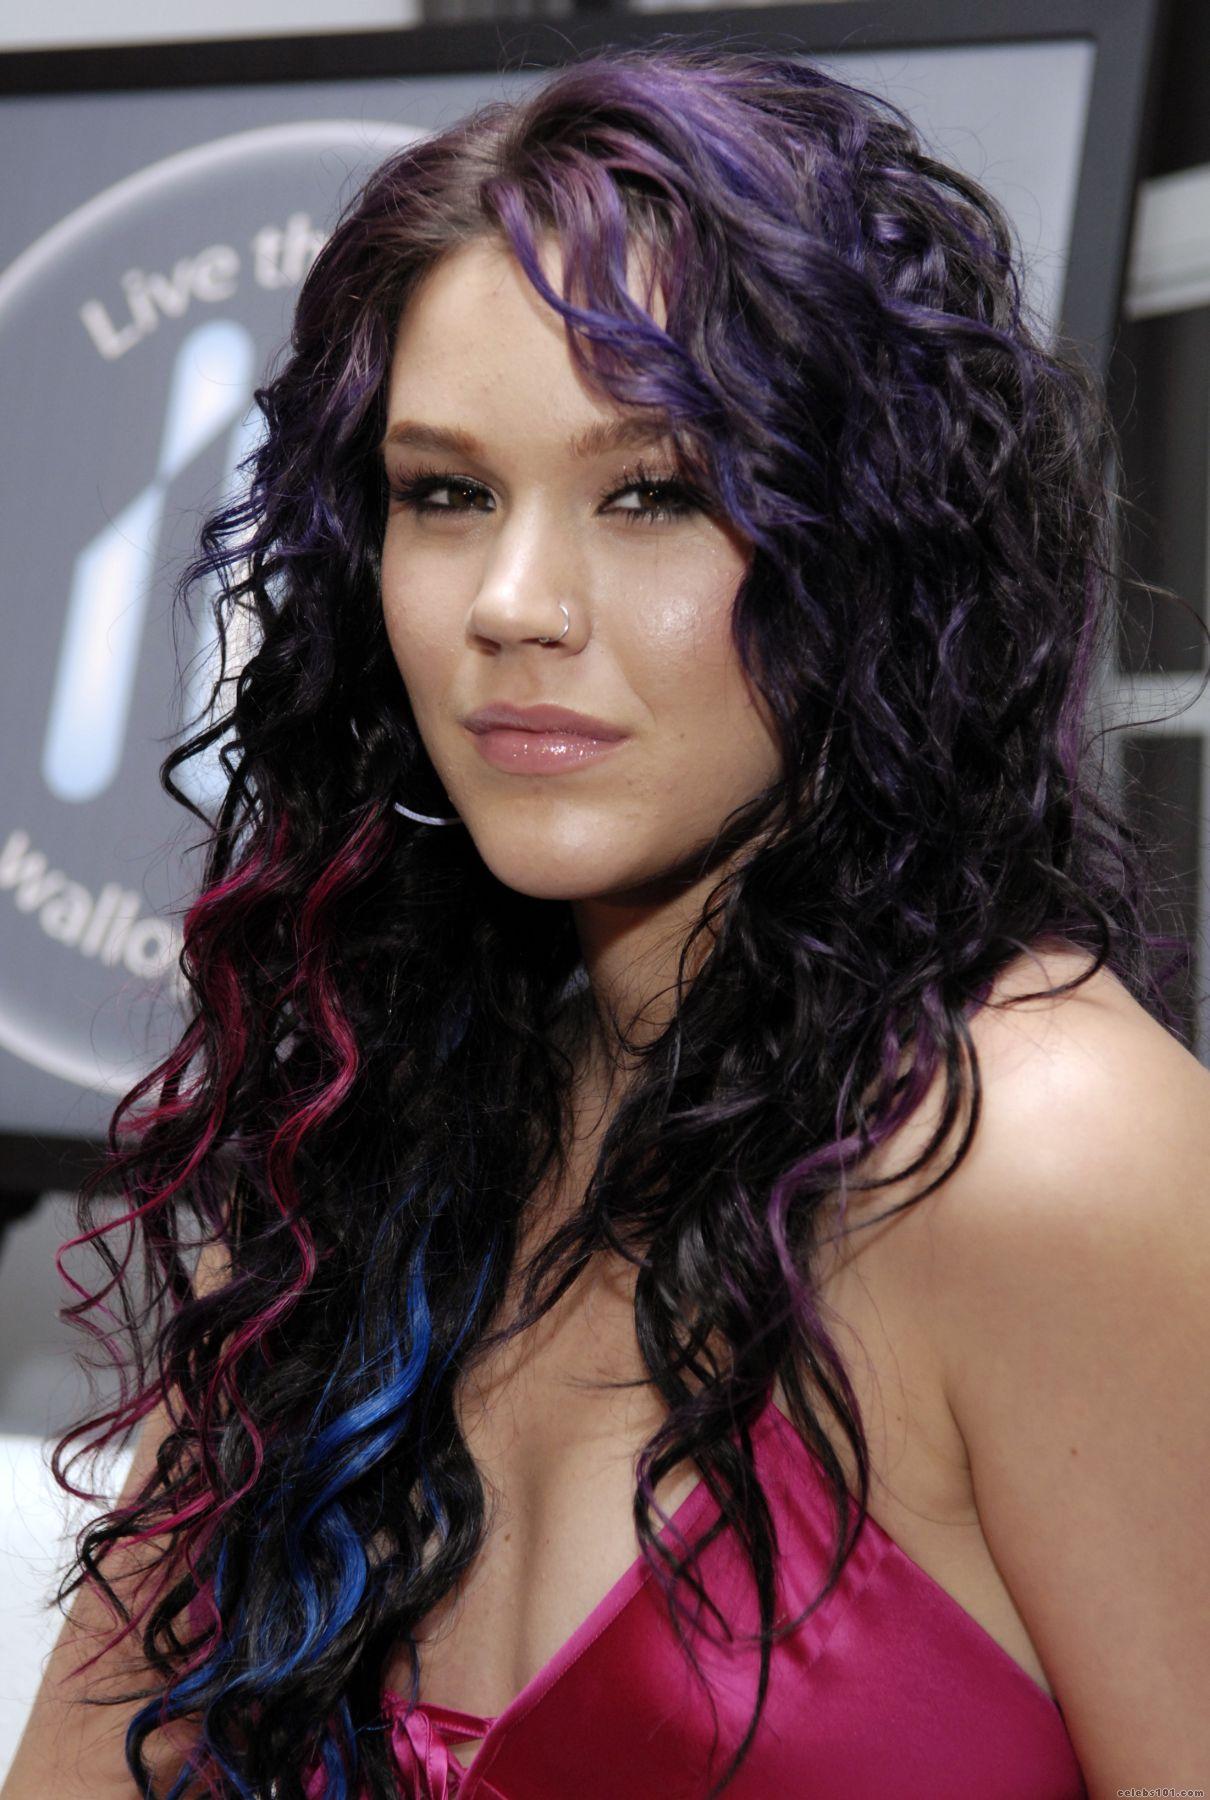 Joss Stone - Images Gallery